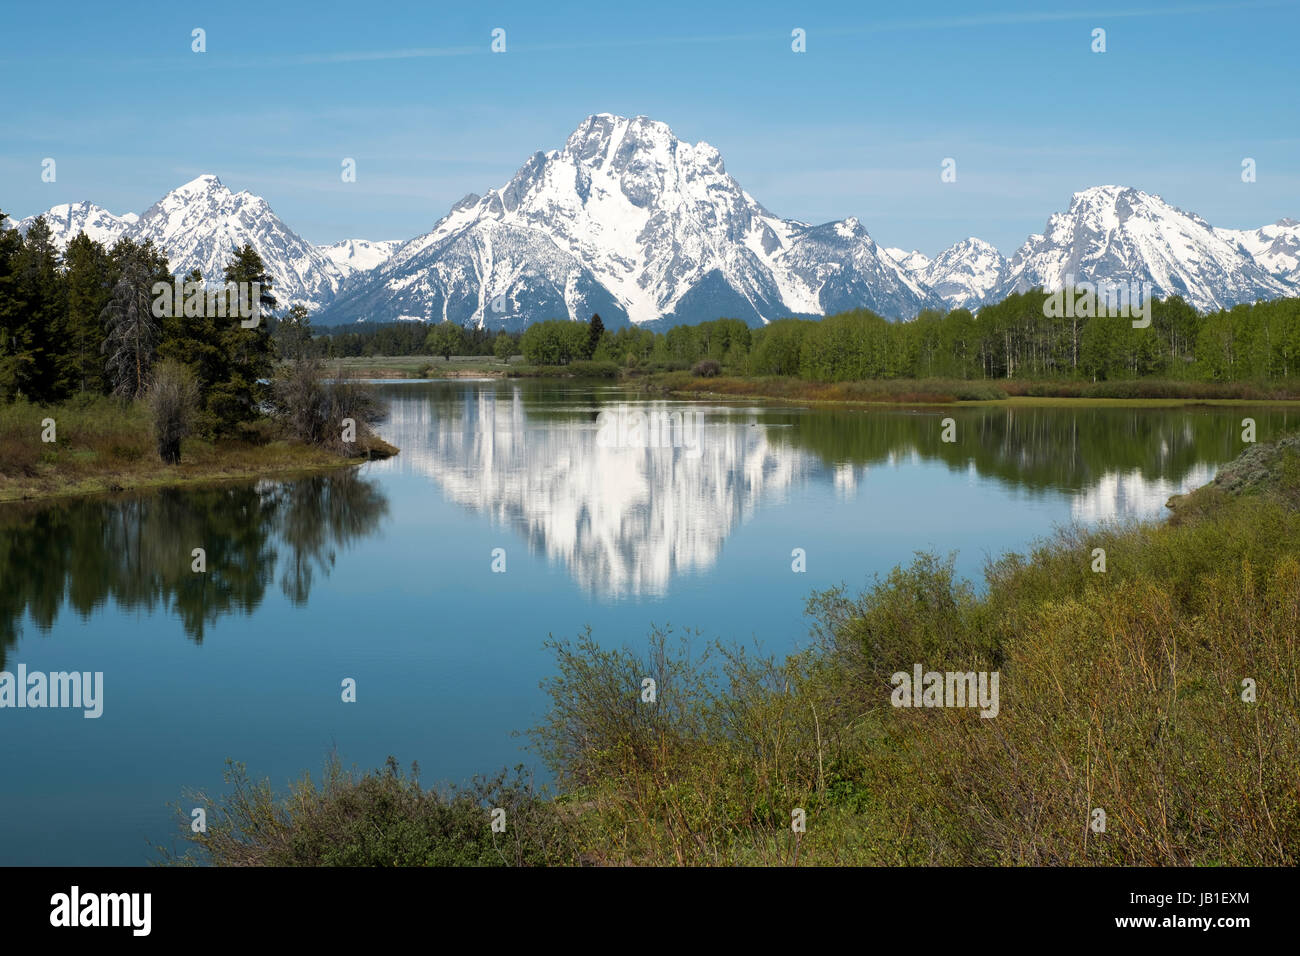 Mount Moran, in the Teton Range, as seen from the Oxbow Bend on the Snake River in Grand Teton National Park Wyoming USA Stock Photo